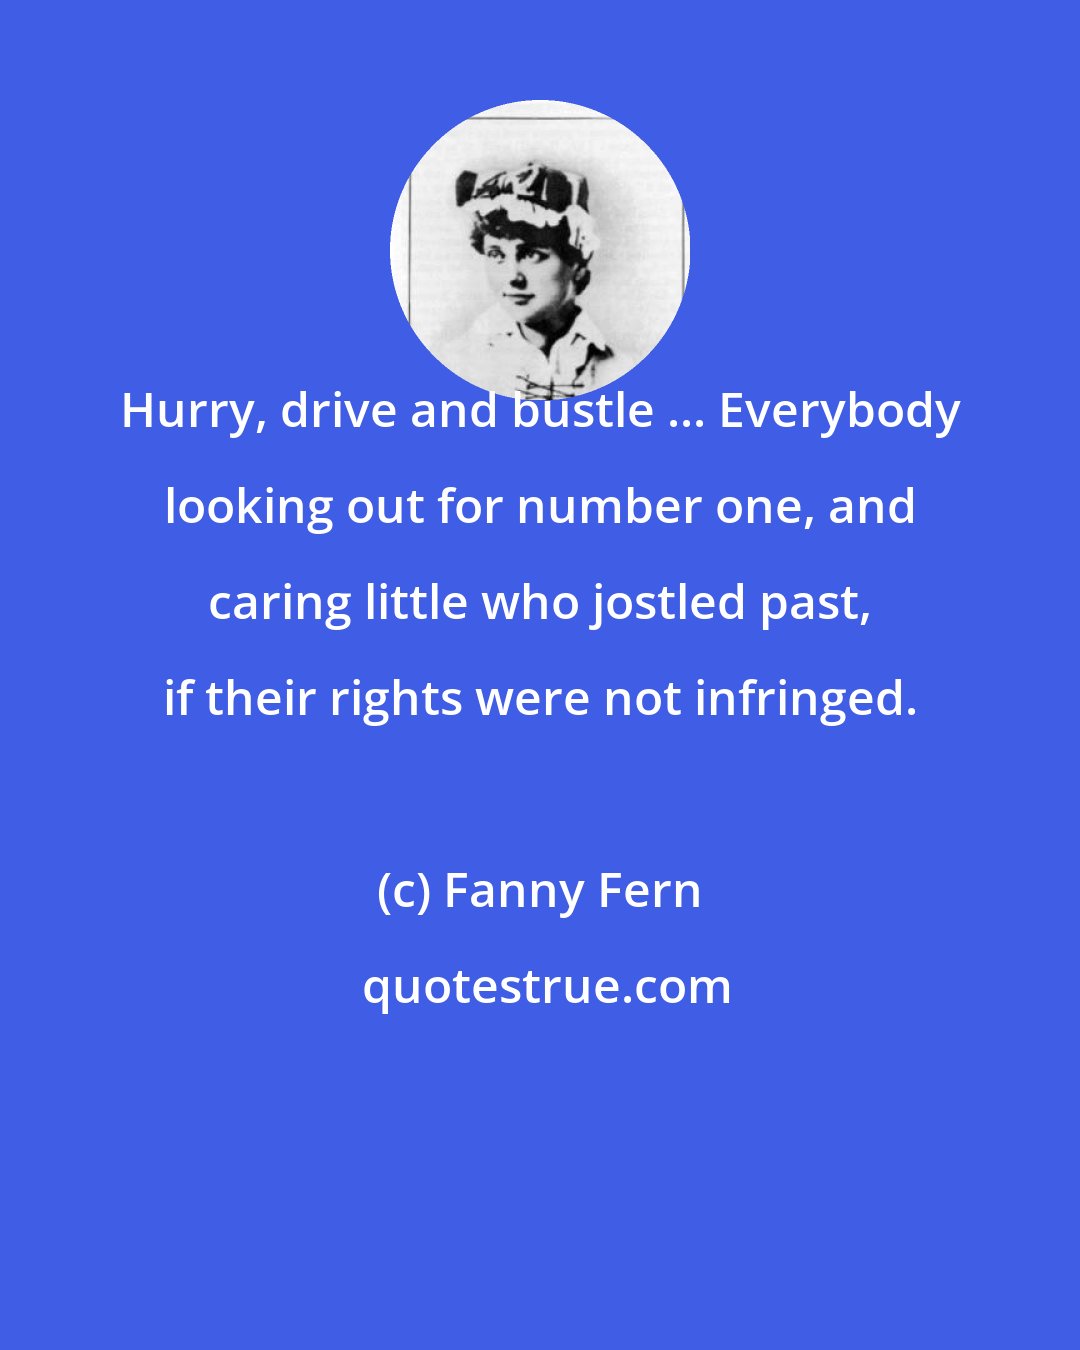 Fanny Fern: Hurry, drive and bustle ... Everybody looking out for number one, and caring little who jostled past, if their rights were not infringed.